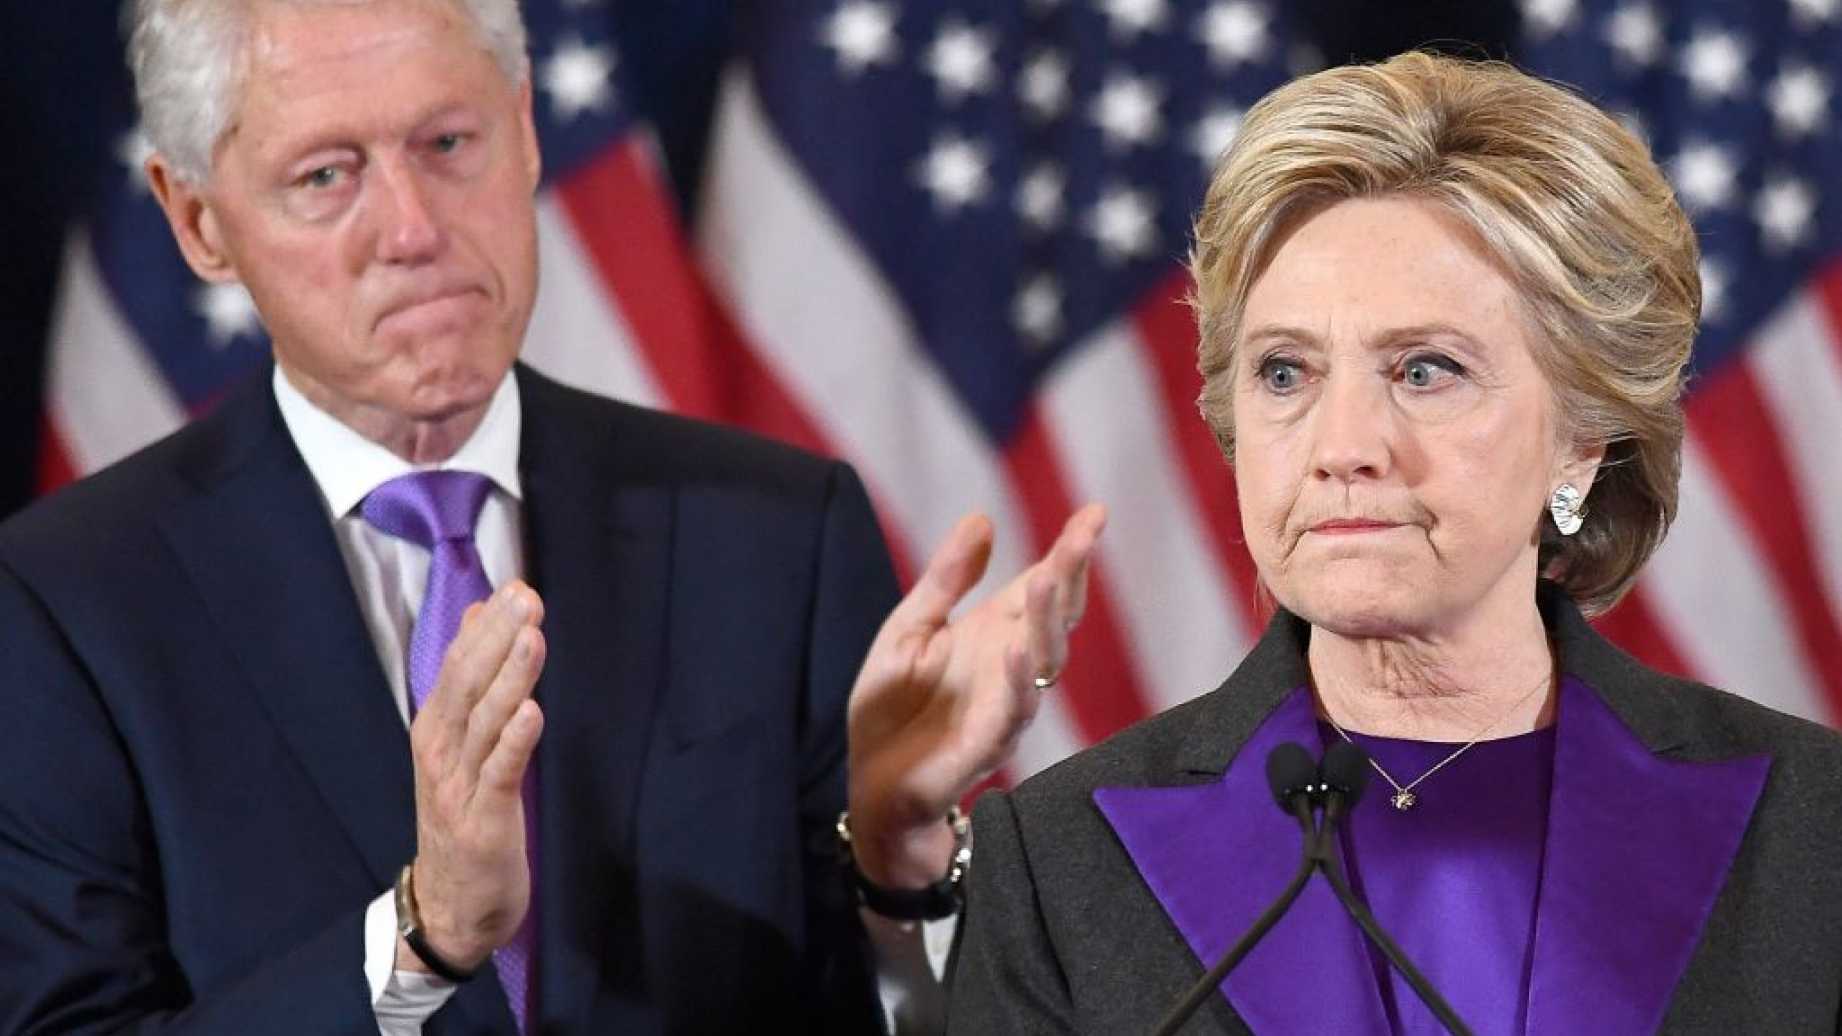 Clintons Connected to Another Major Pedophile Ring | The Washington Pundit